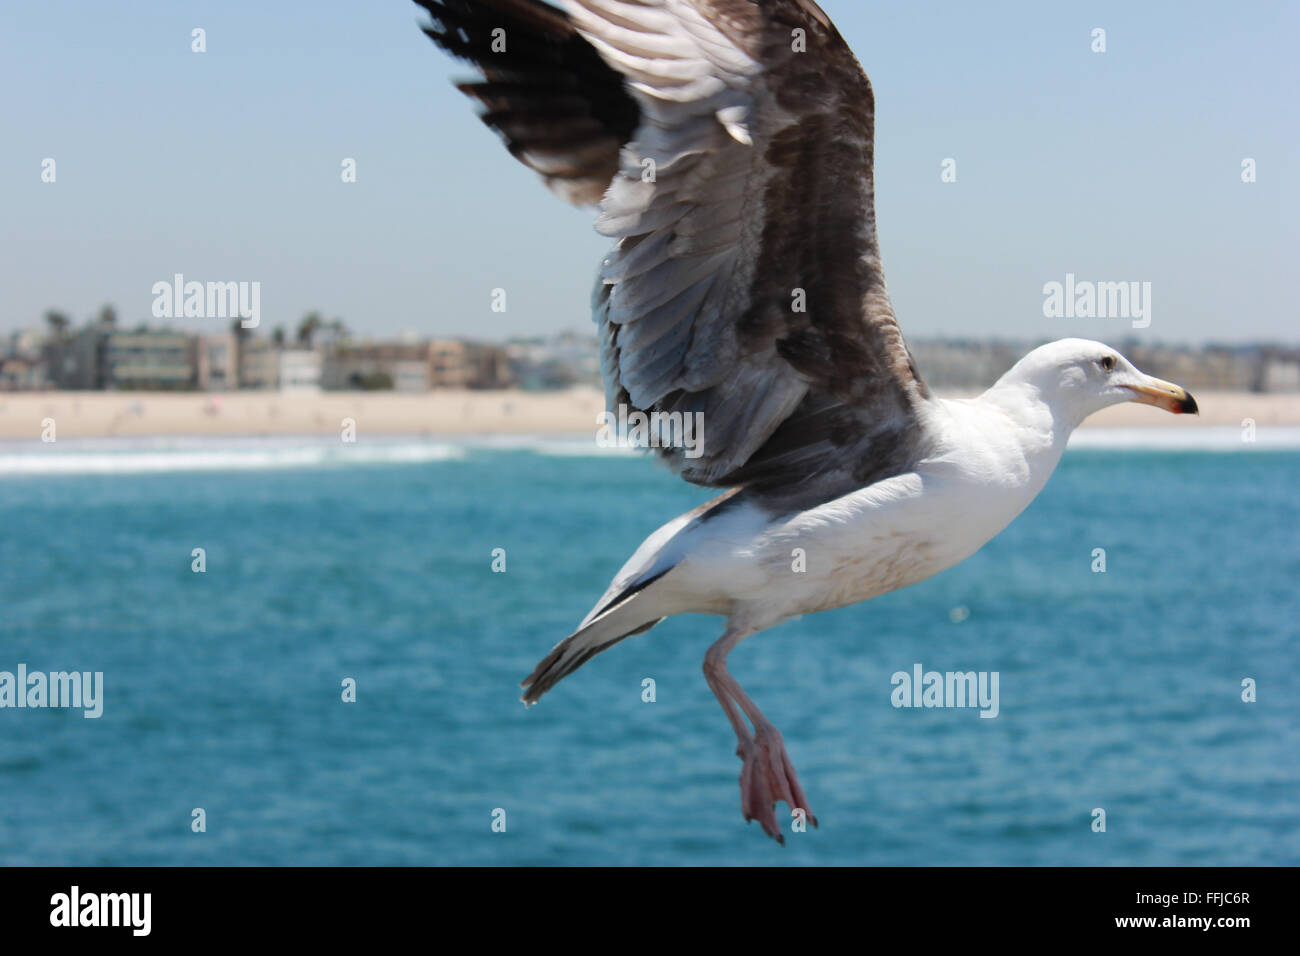 Seagull at Venice Beach Banque D'Images